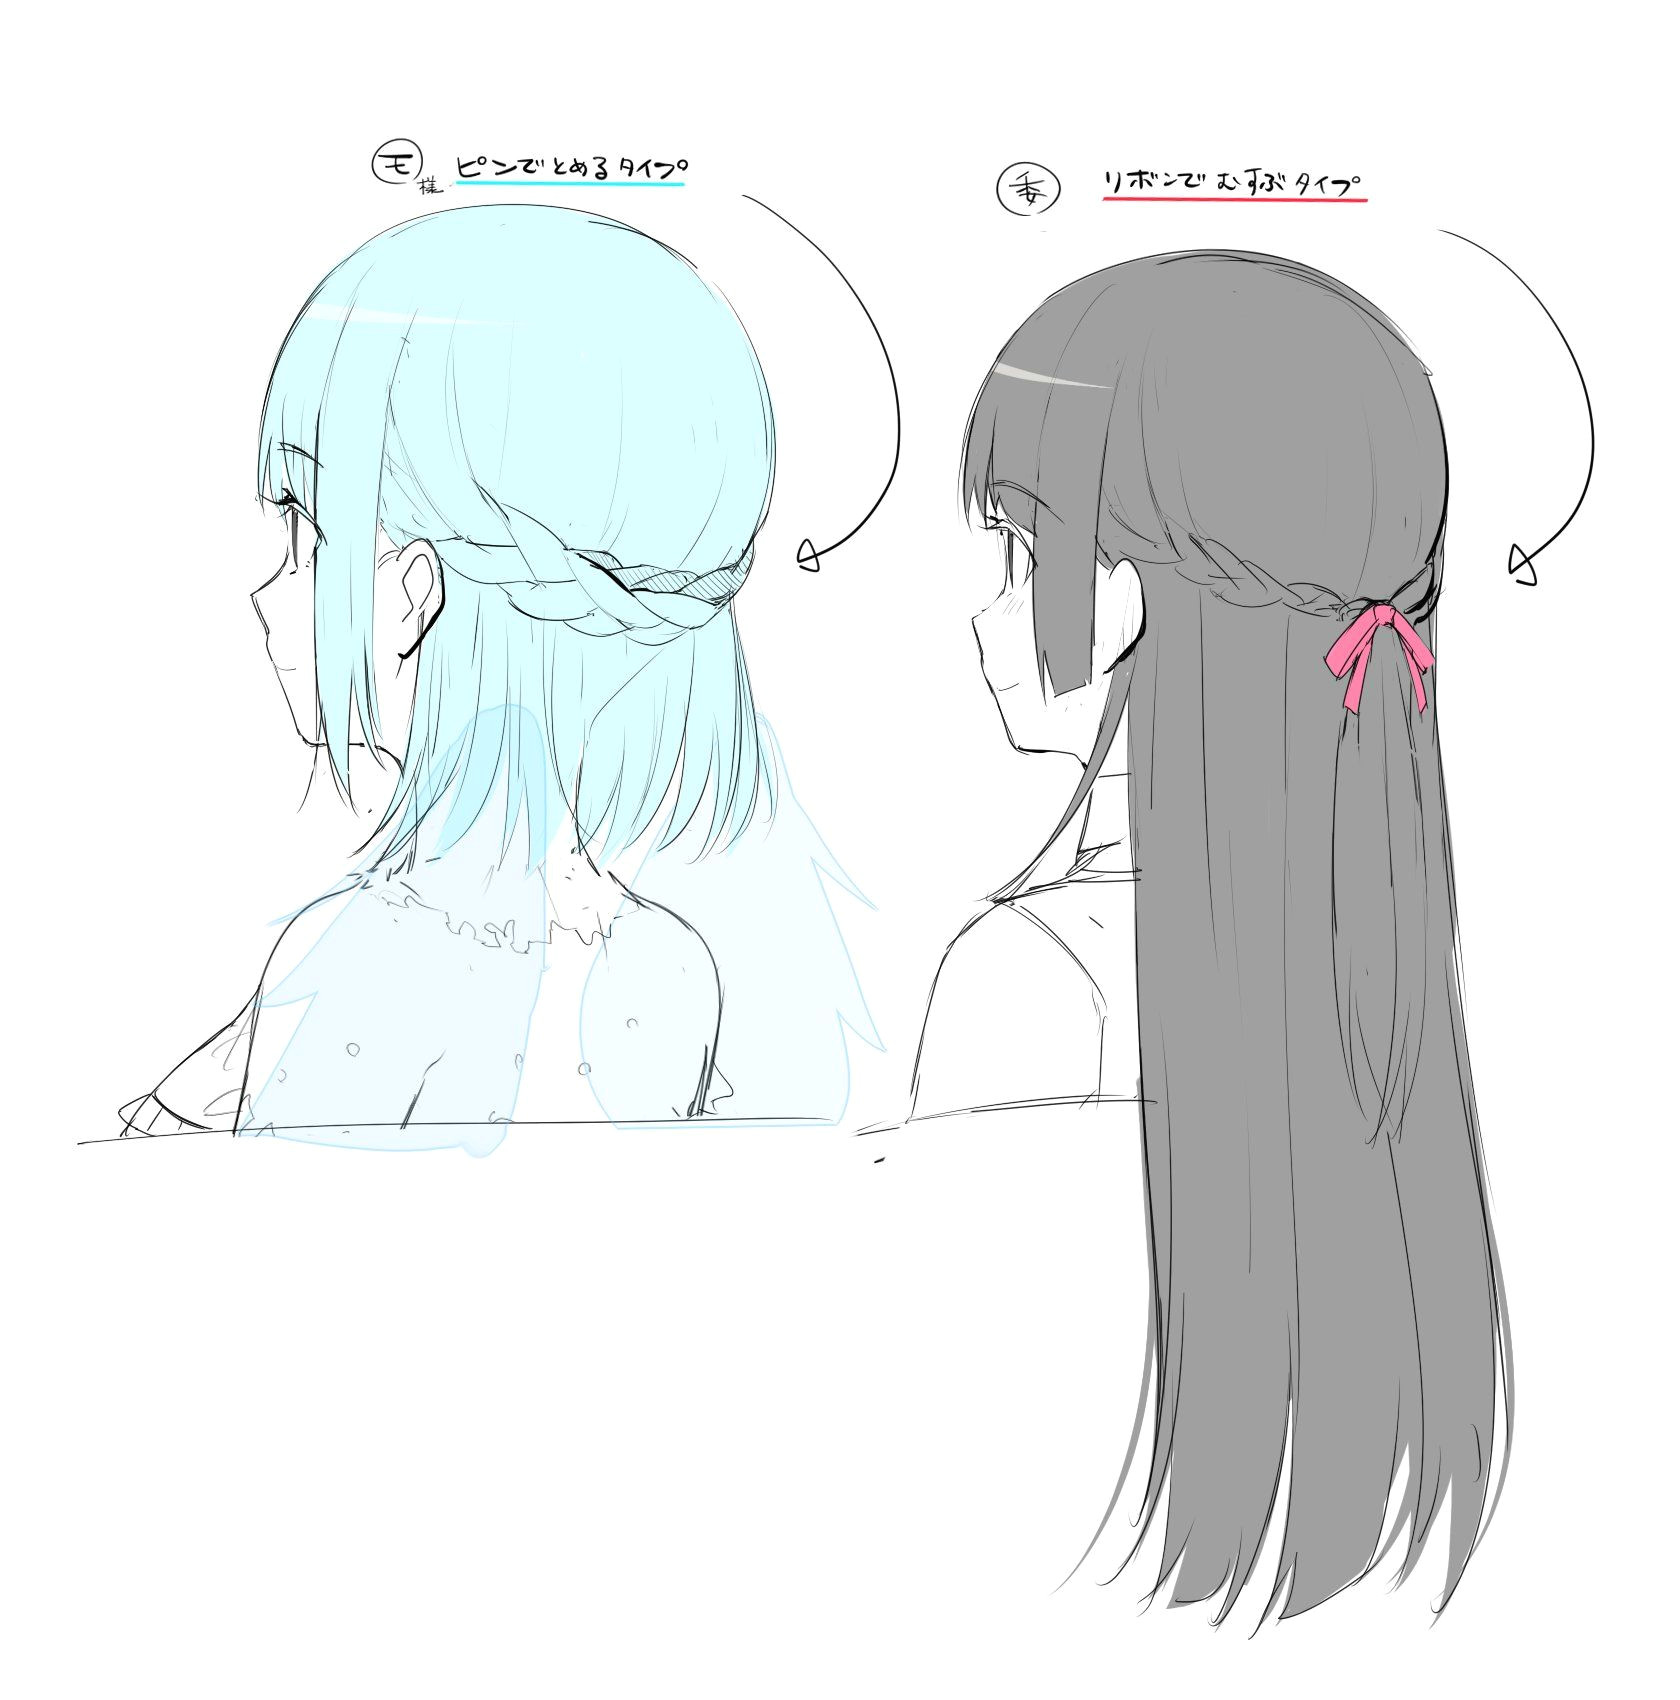 How to Draw Long Anime Hair Media Preview Sketches Drawings How to Draw Hair